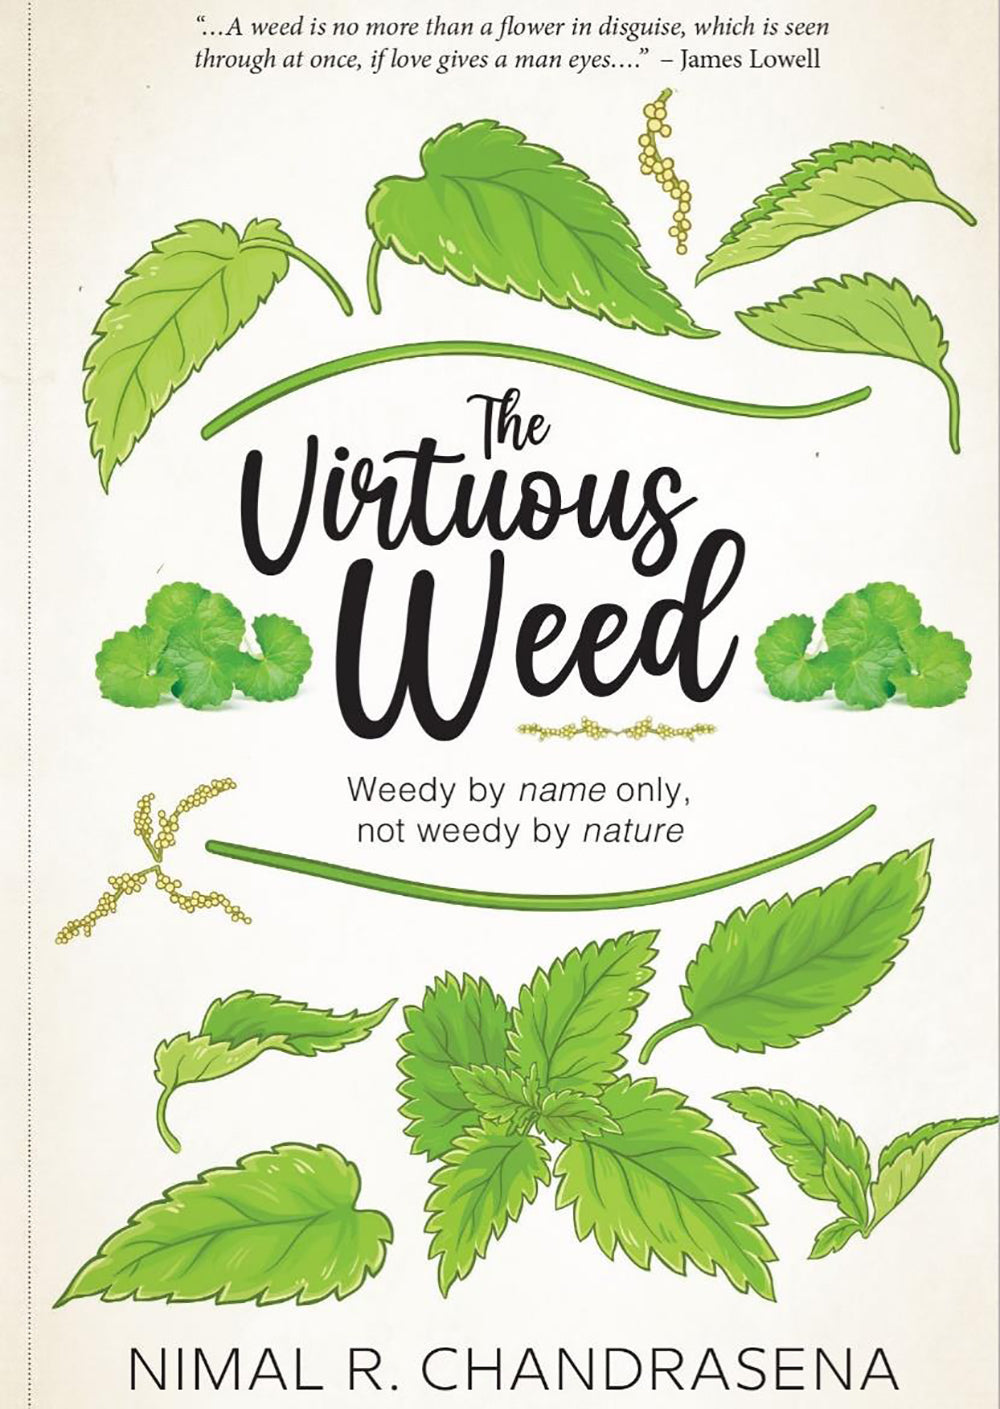 The Virtuous Weed: Weedy by Name only, Not Weedy by Nature by Nimal R. Chandrasena